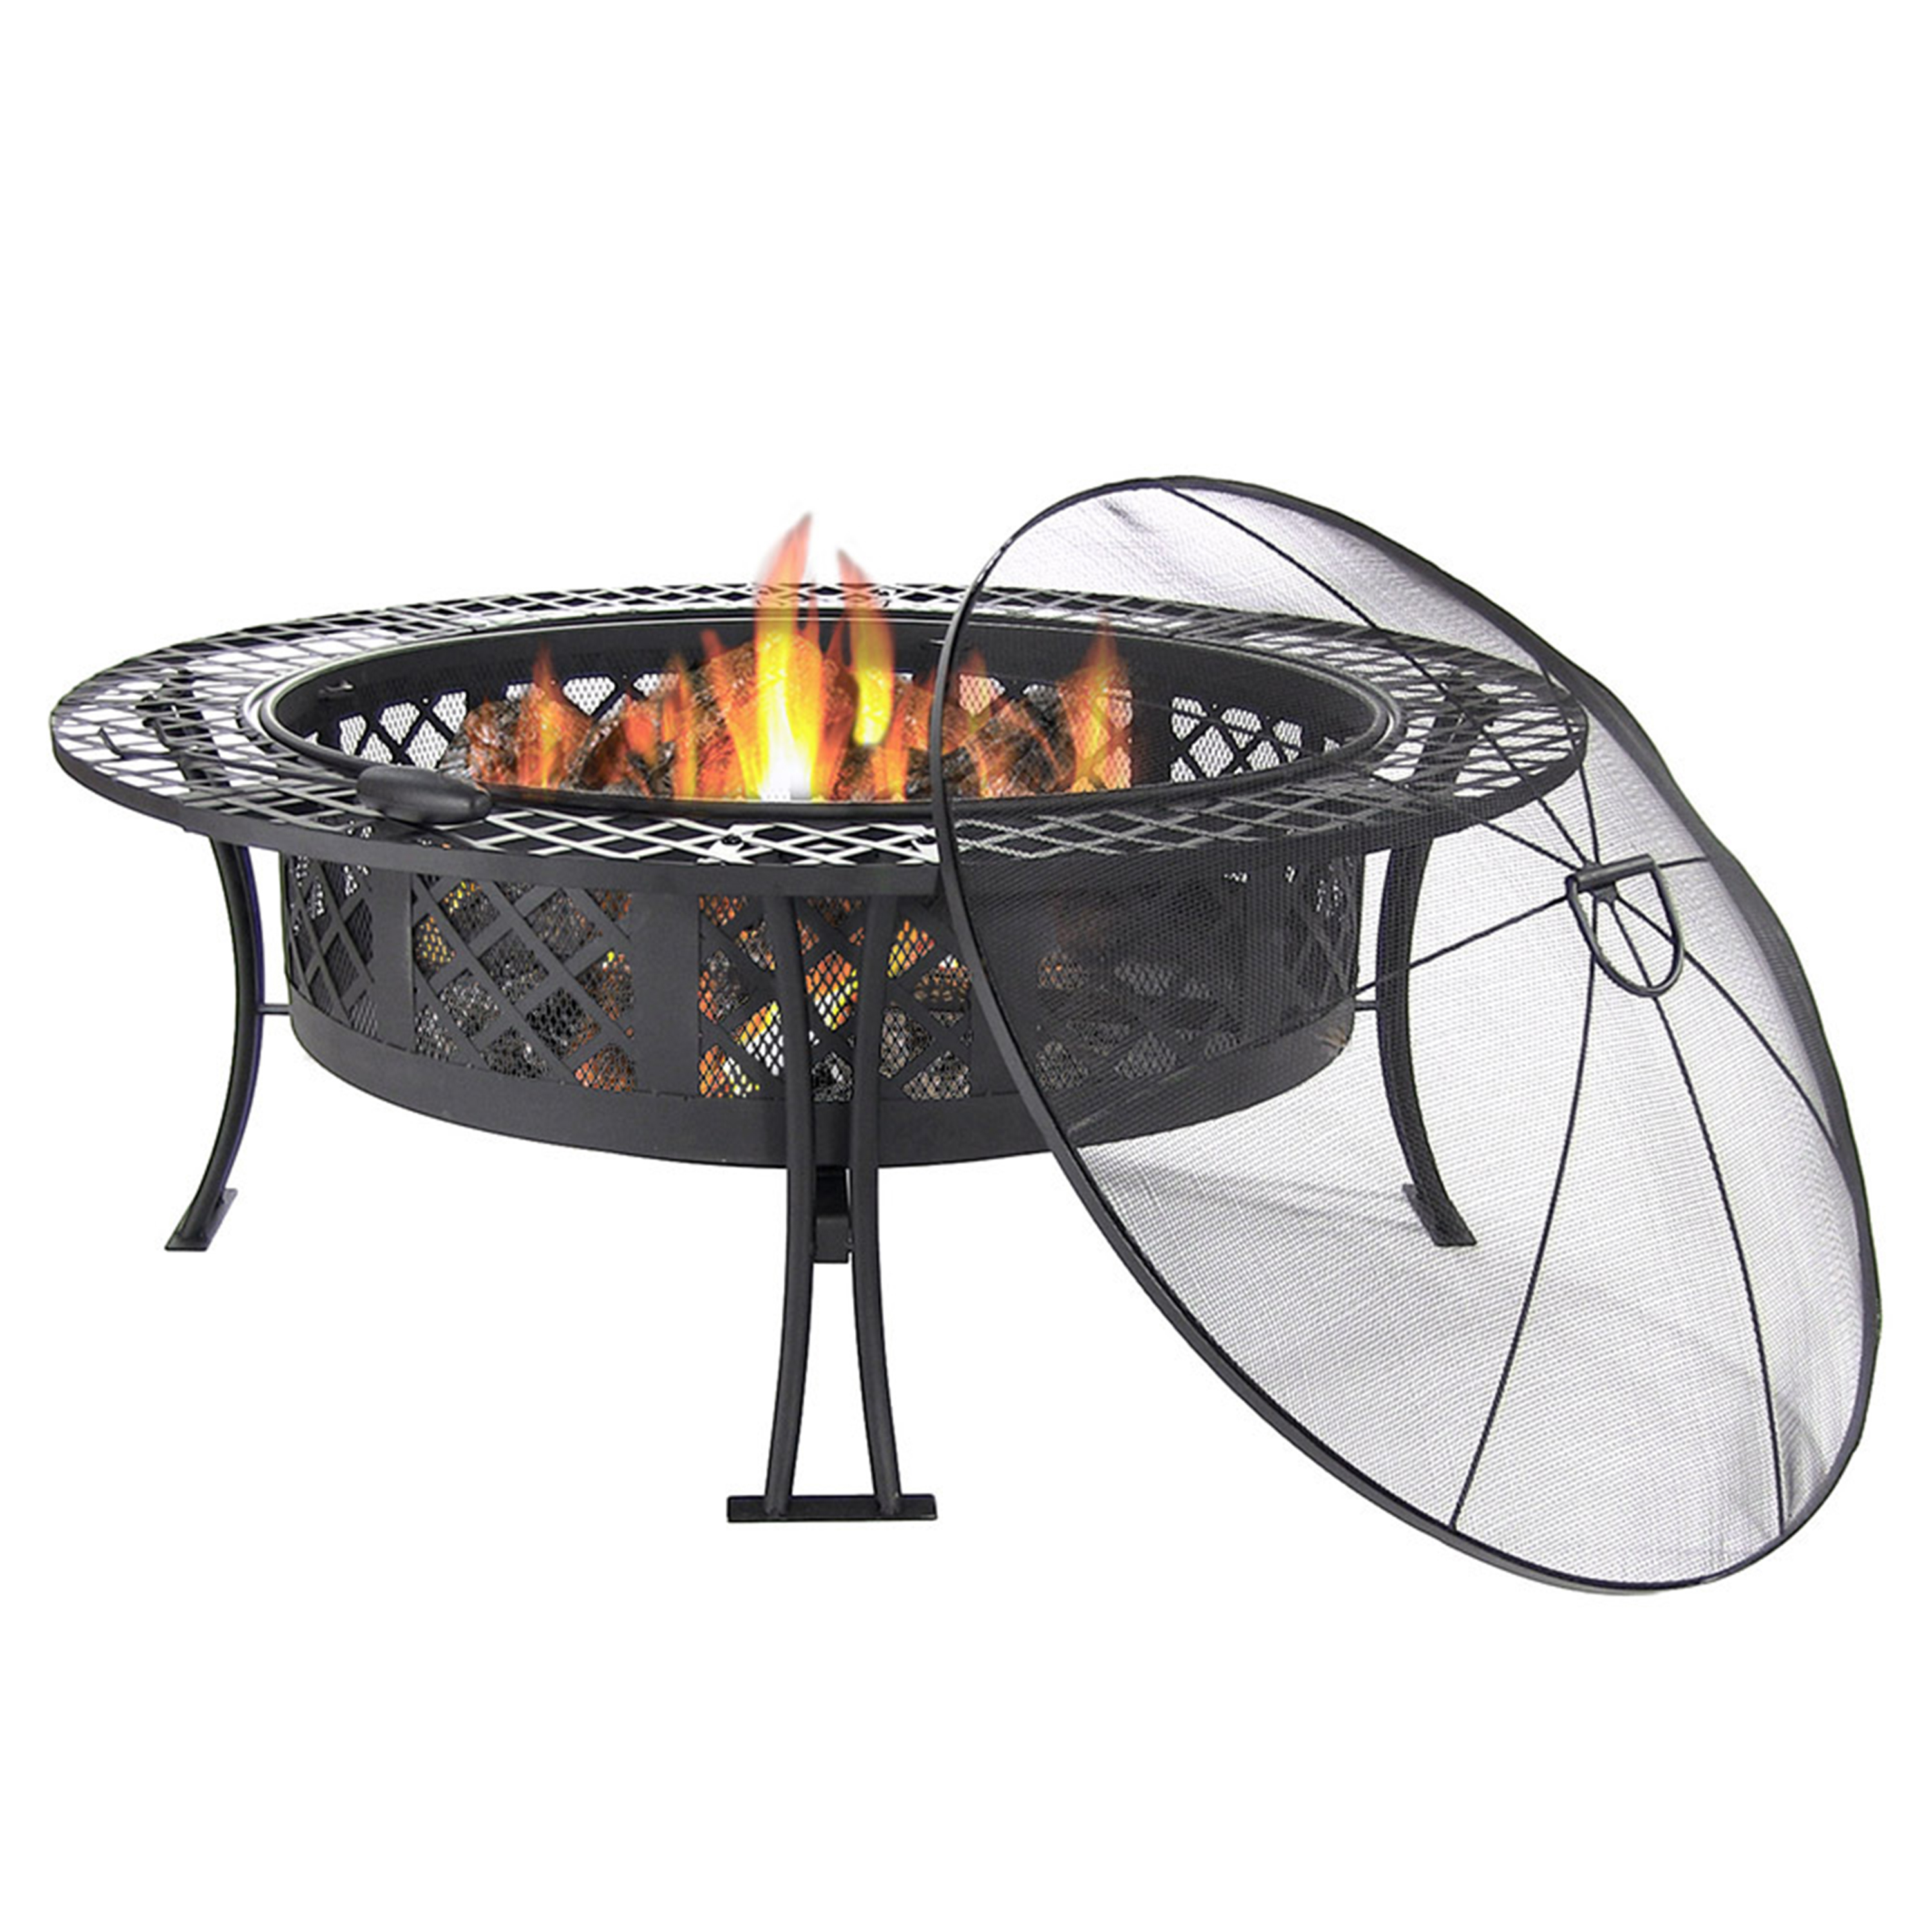 40 in Diamond Weave Fire Pit with Spark Screen and Poker